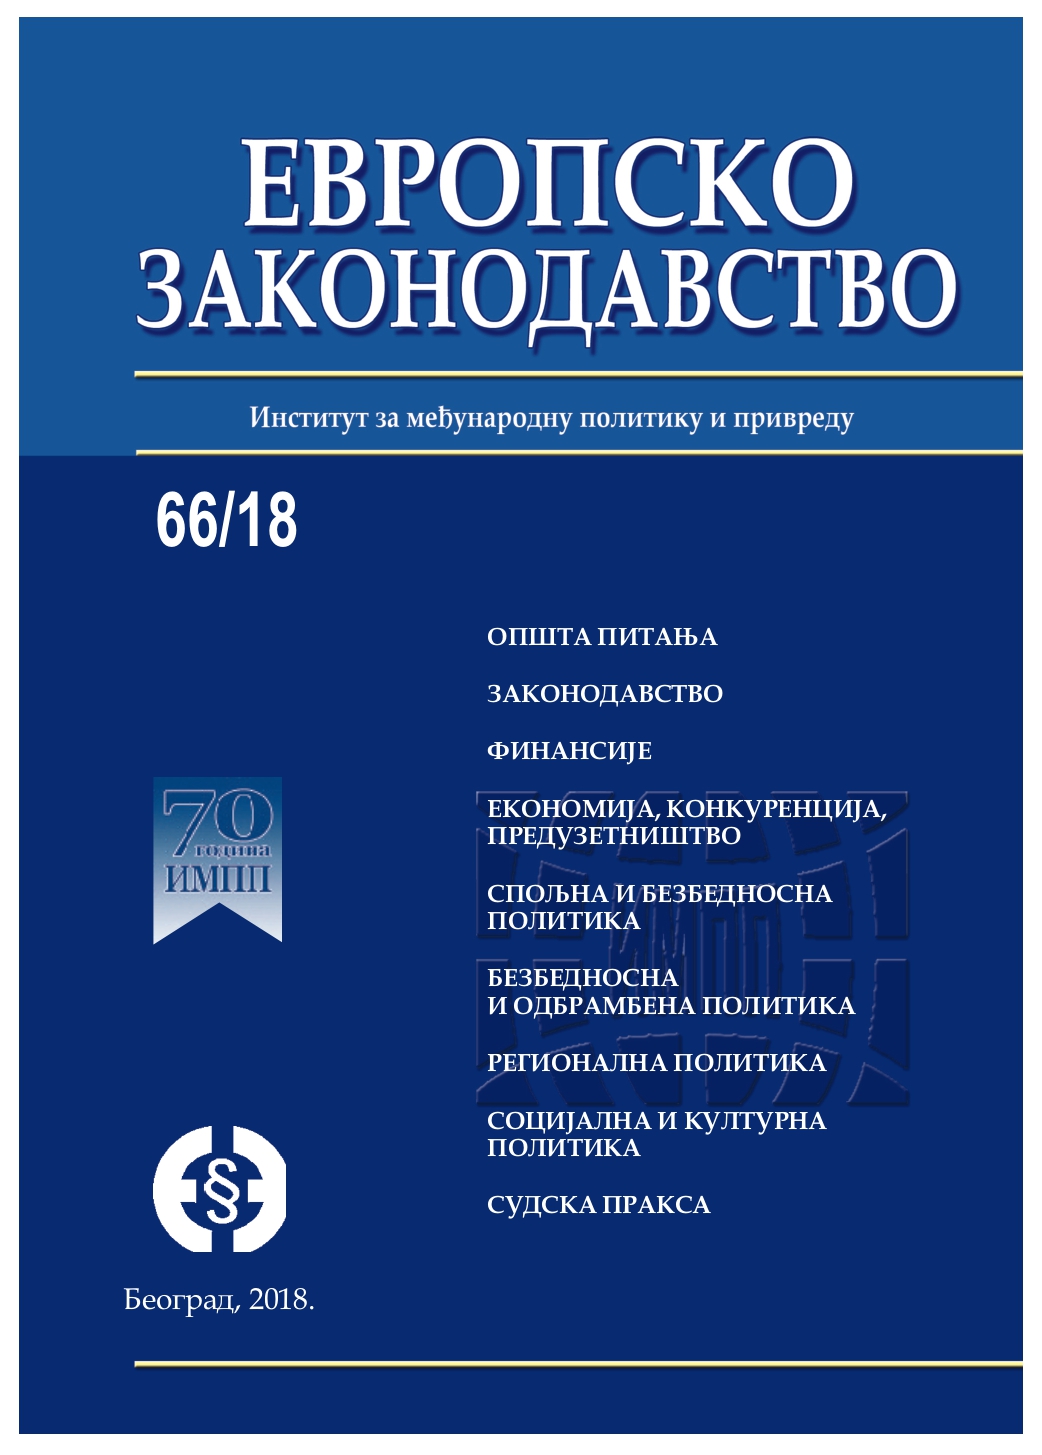 State aid control in the European Union - obligations of the Republic of Serbia Cover Image